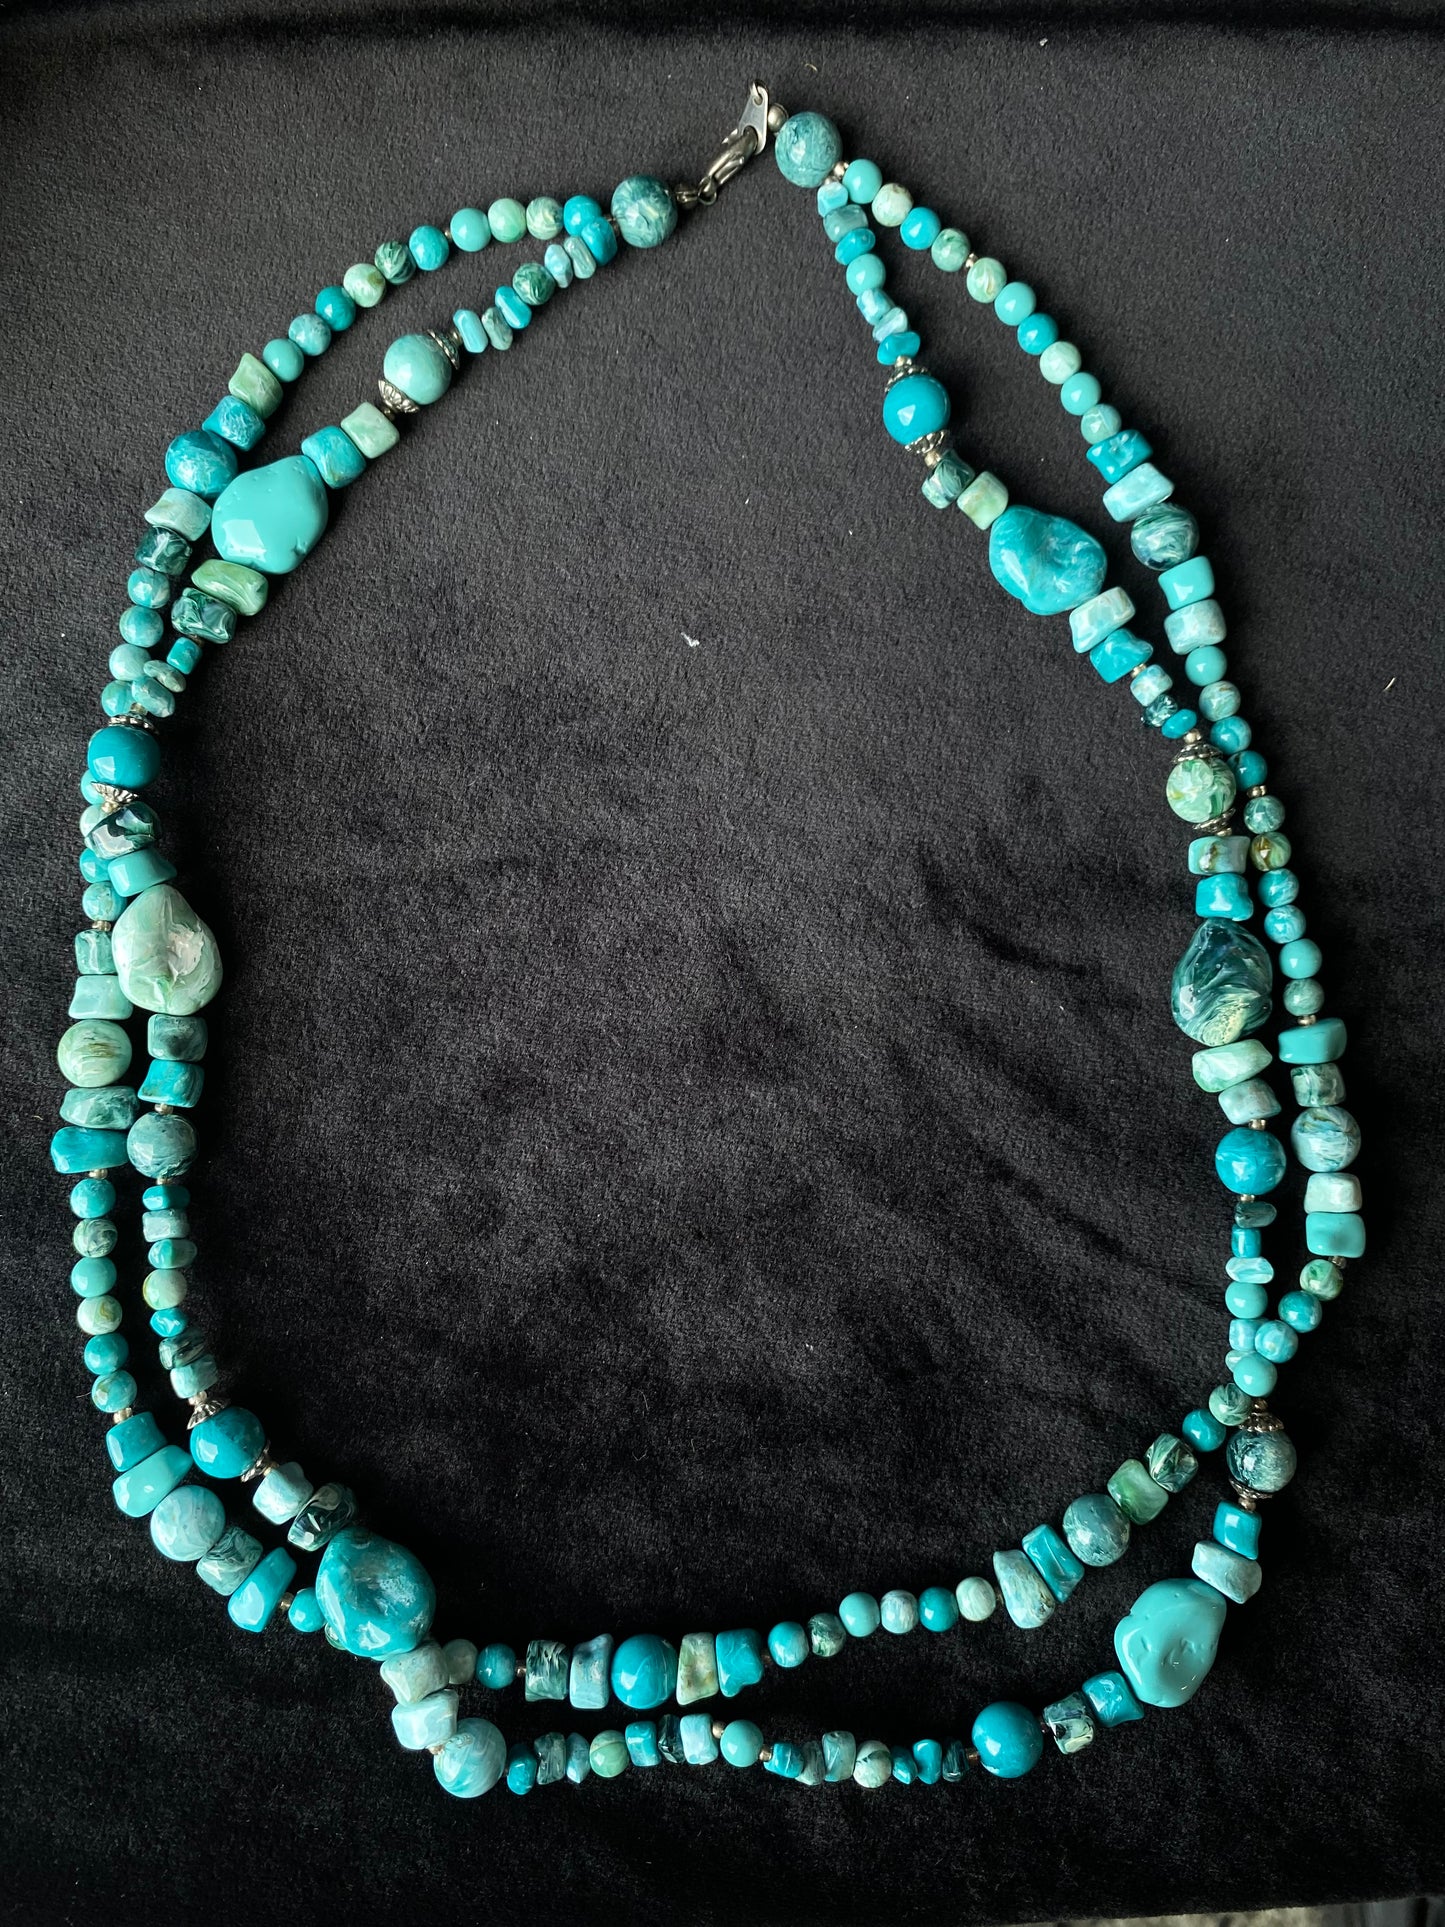 Teal plastic stone necklace